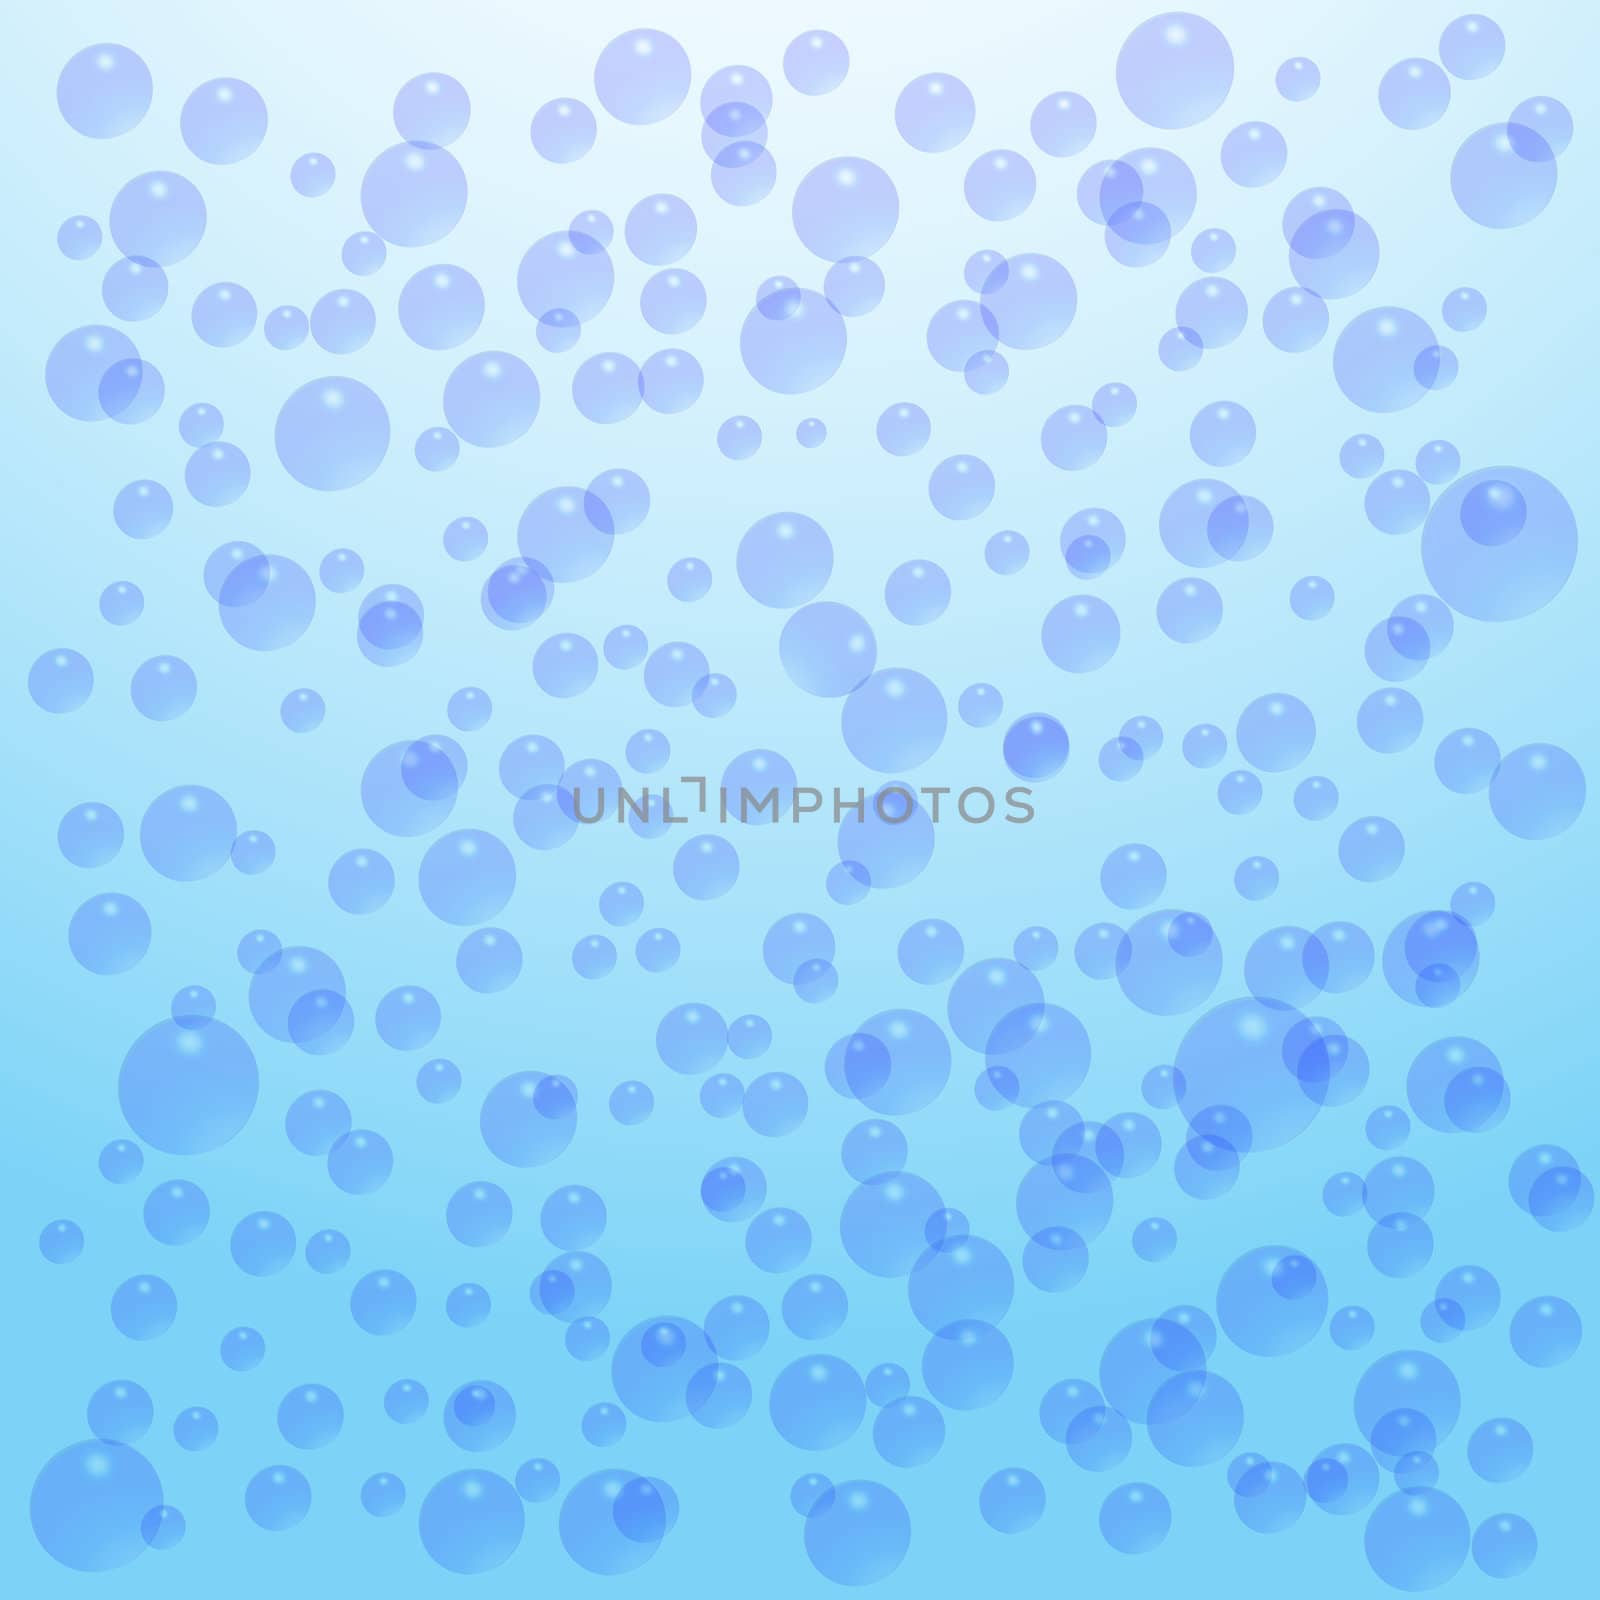 Water bubbles background, design for print